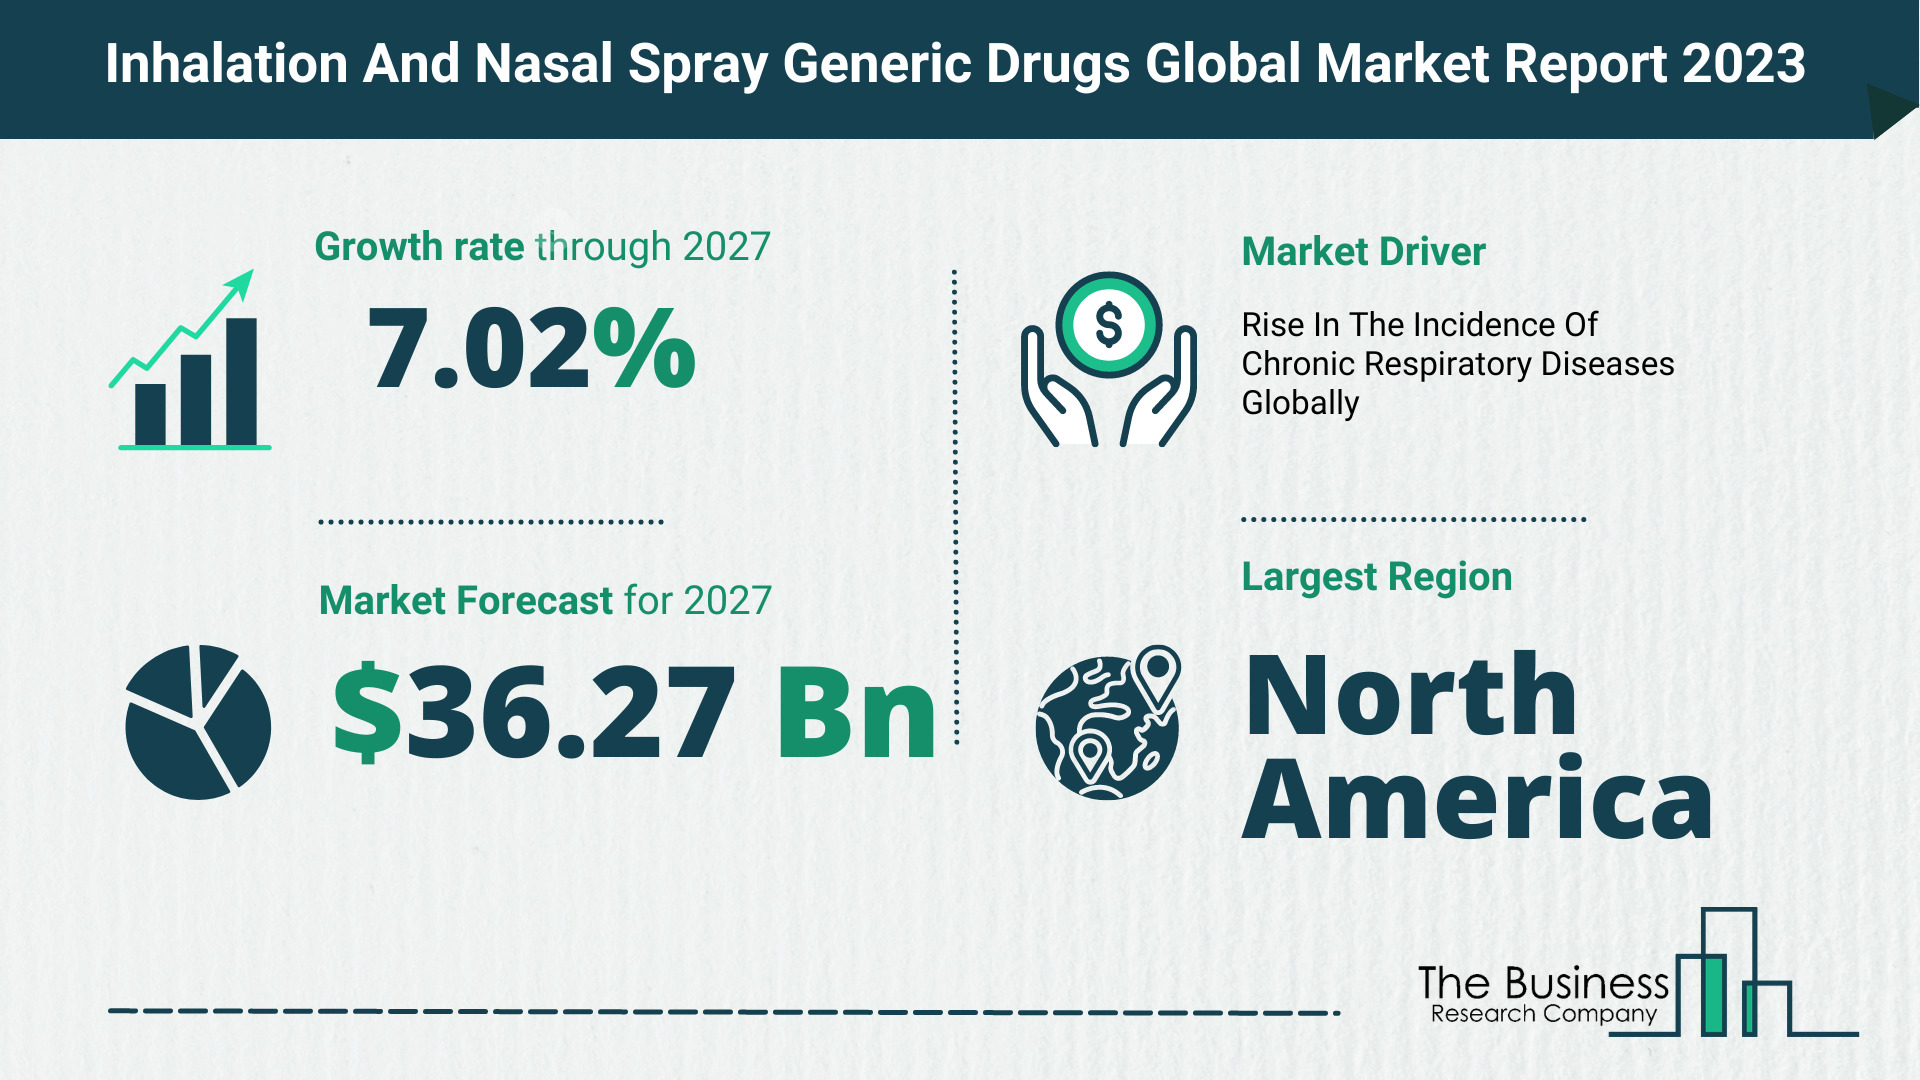 Global Inhalation And Nasal Spray Generic Drugs Market Opportunities And Strategies 2023